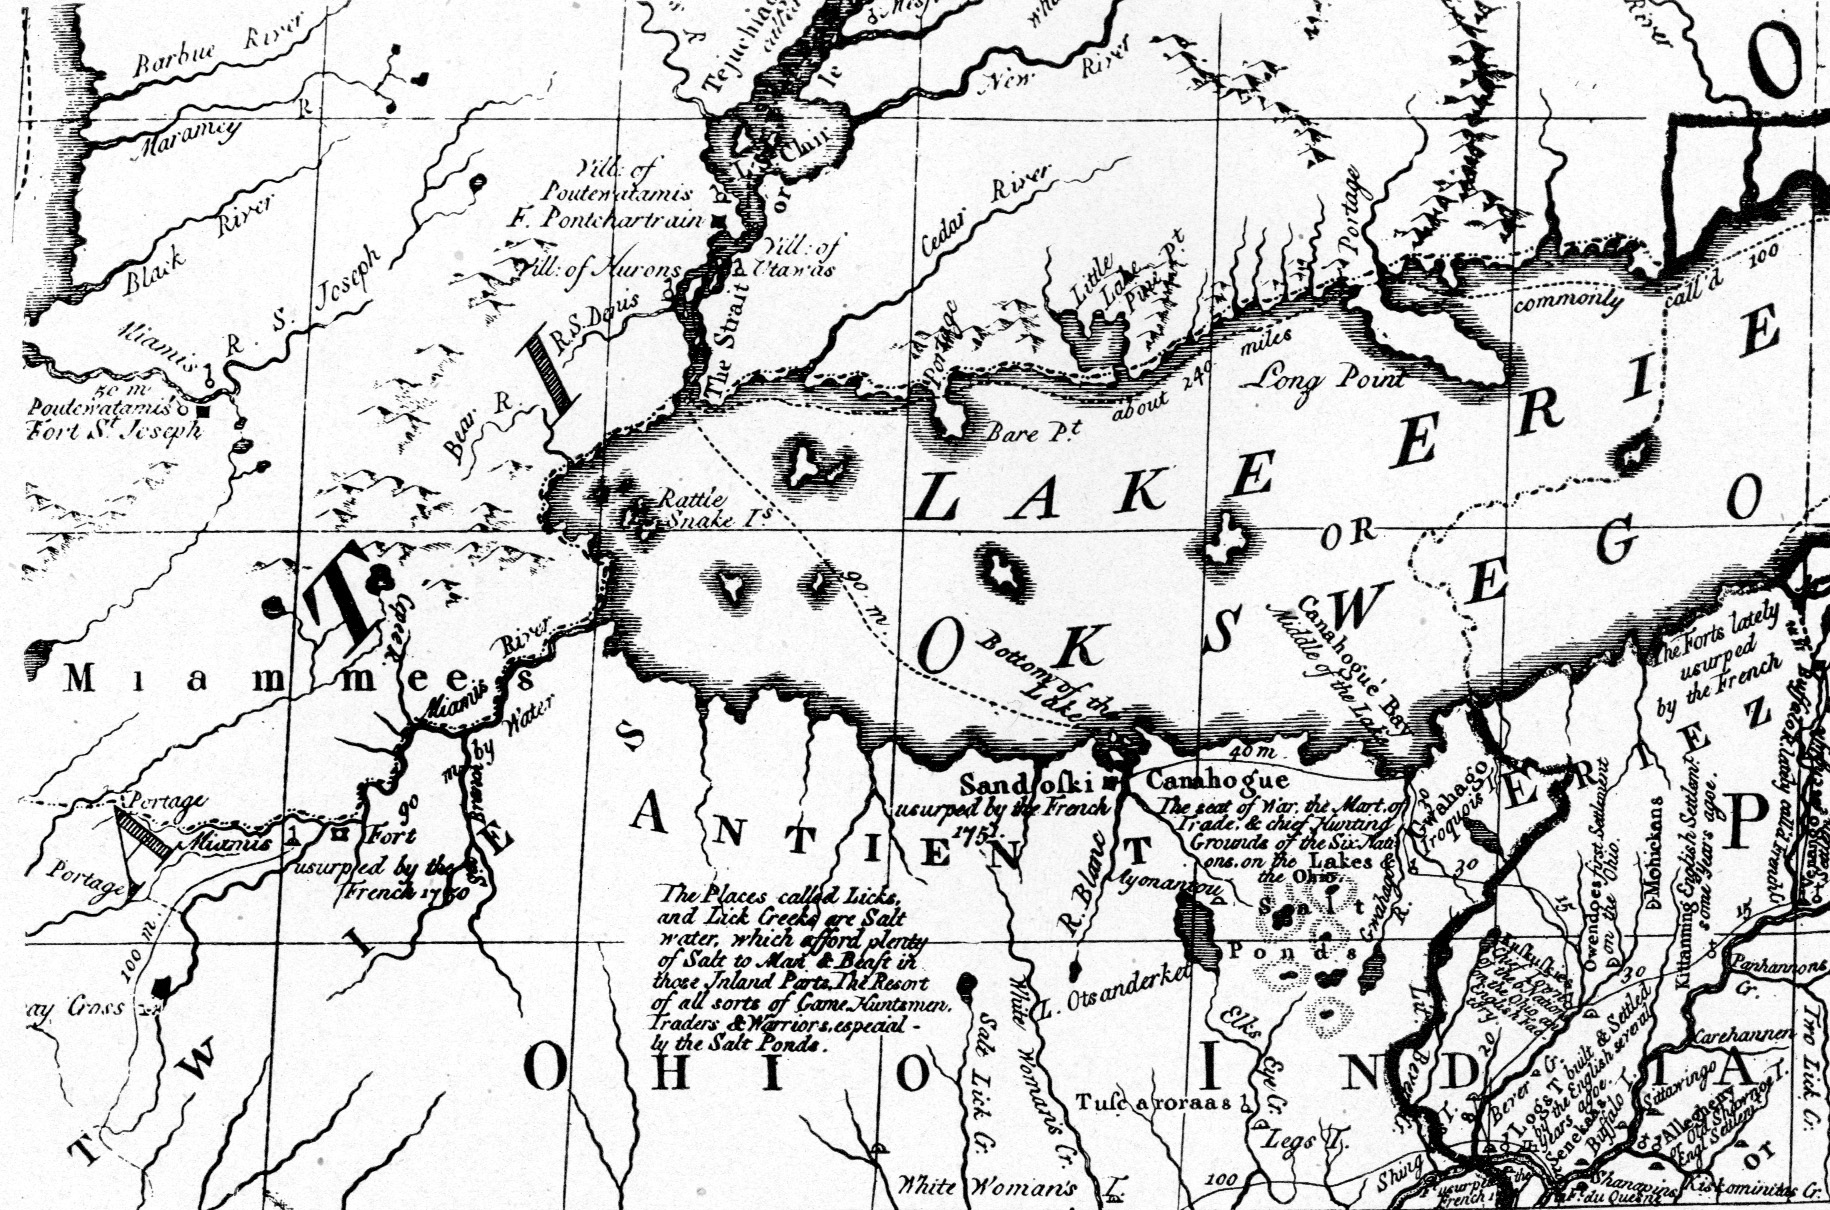 Mitchell's map of 1755